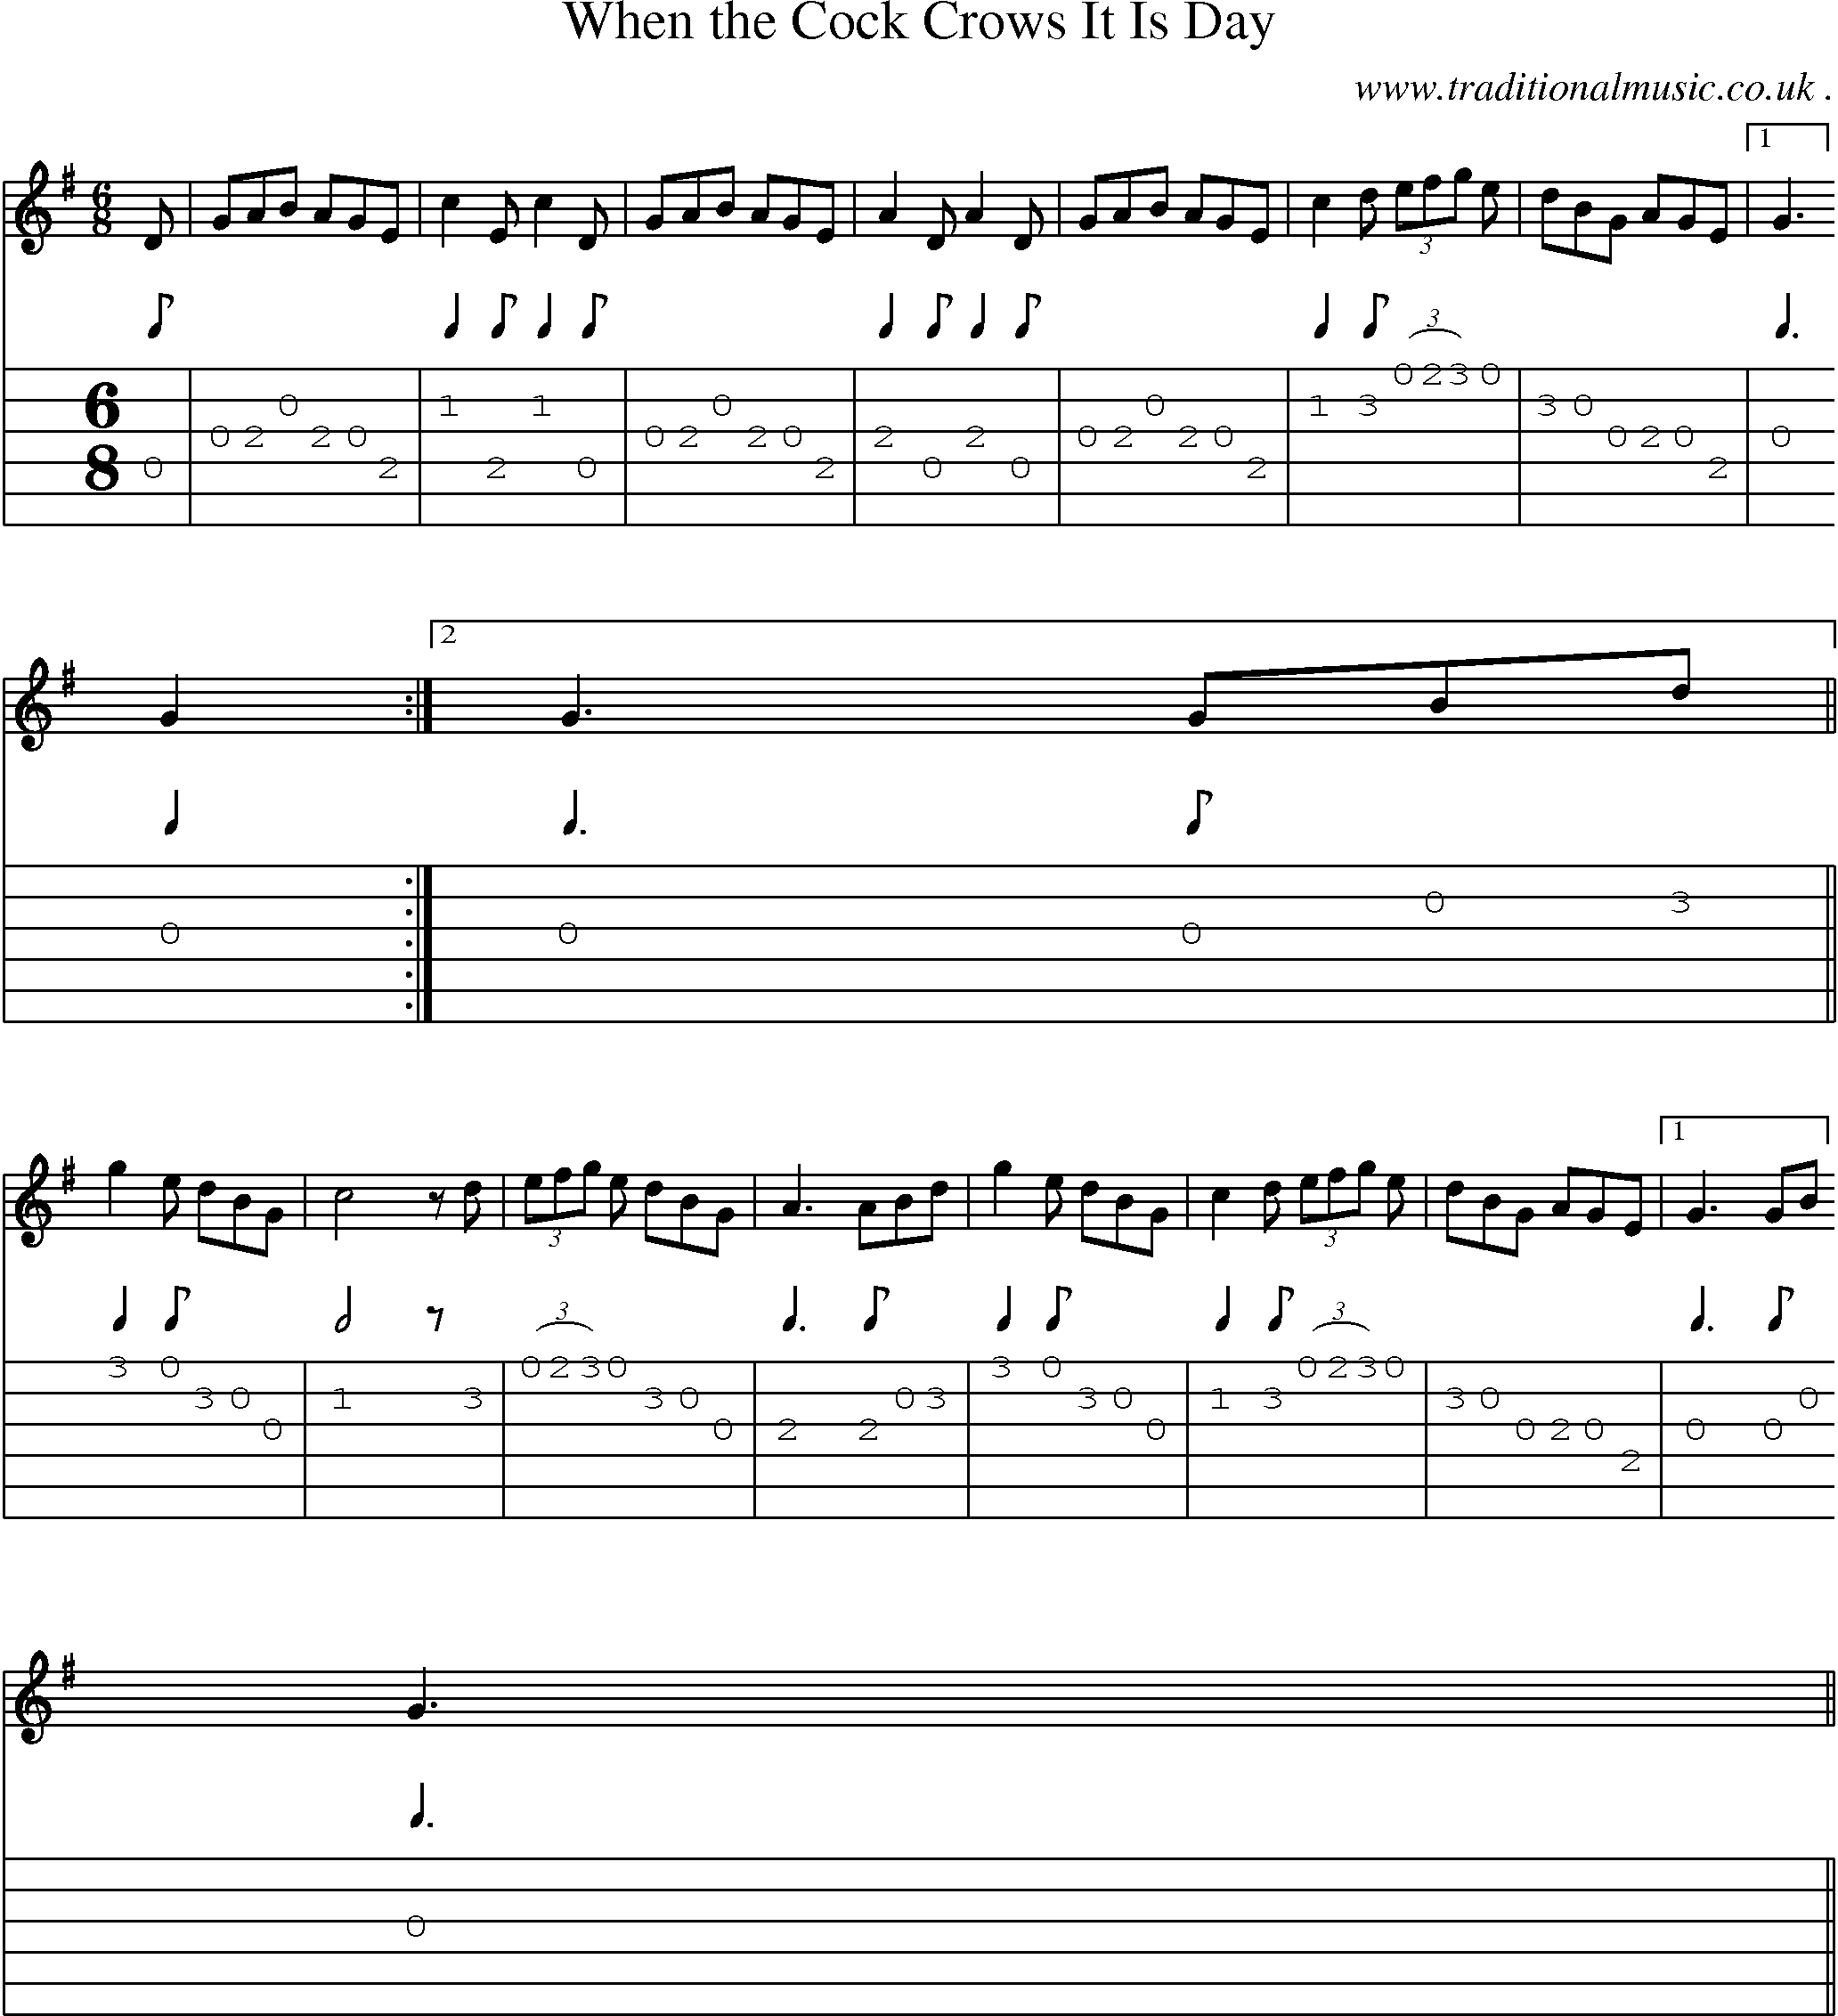 Sheet-Music and Guitar Tabs for When The Cock Crows It Is Day